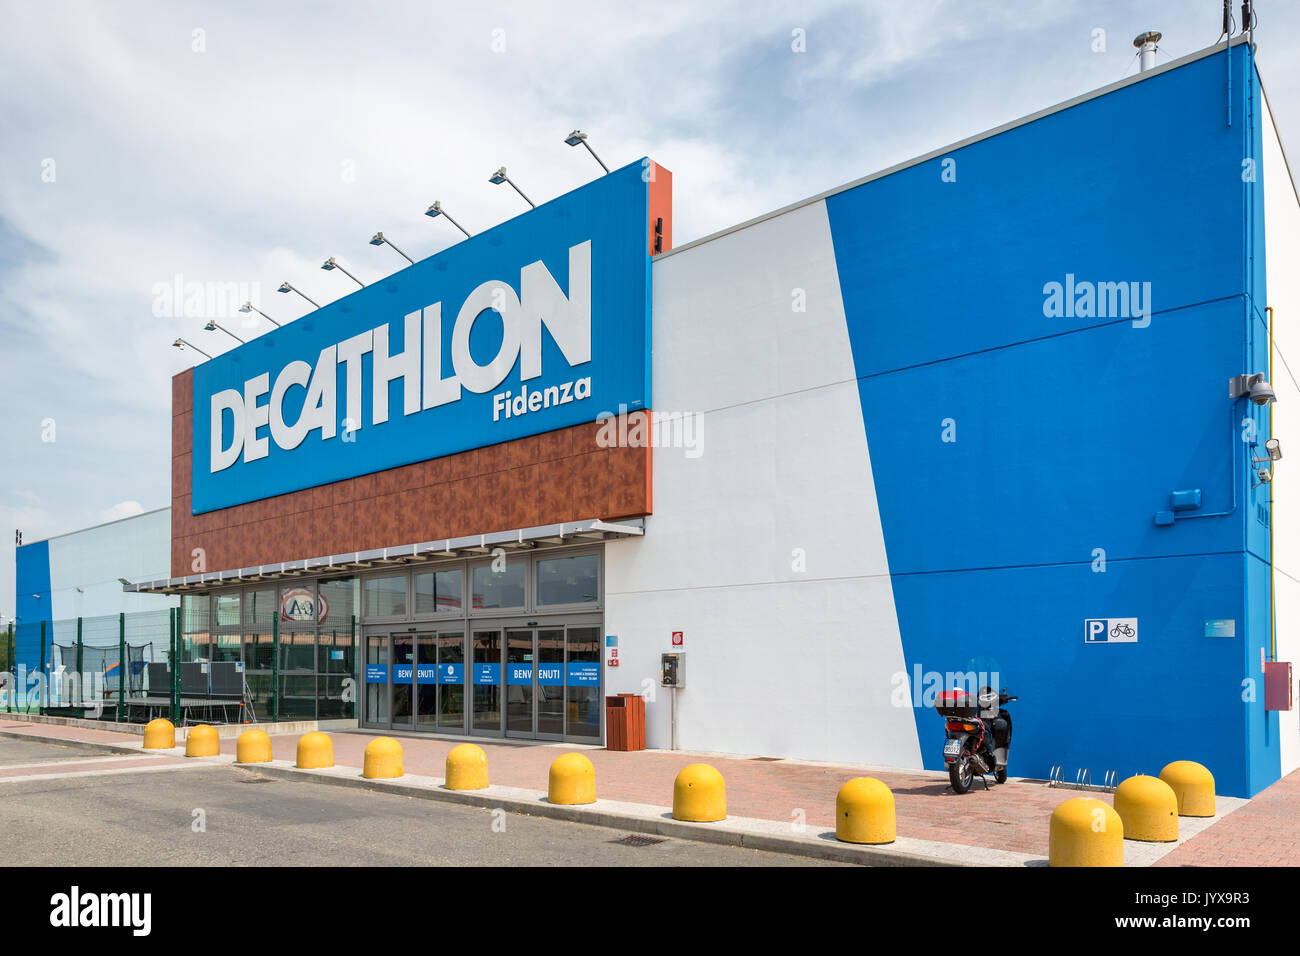 Decathlon High Resolution Stock Photography and Images - Alamy